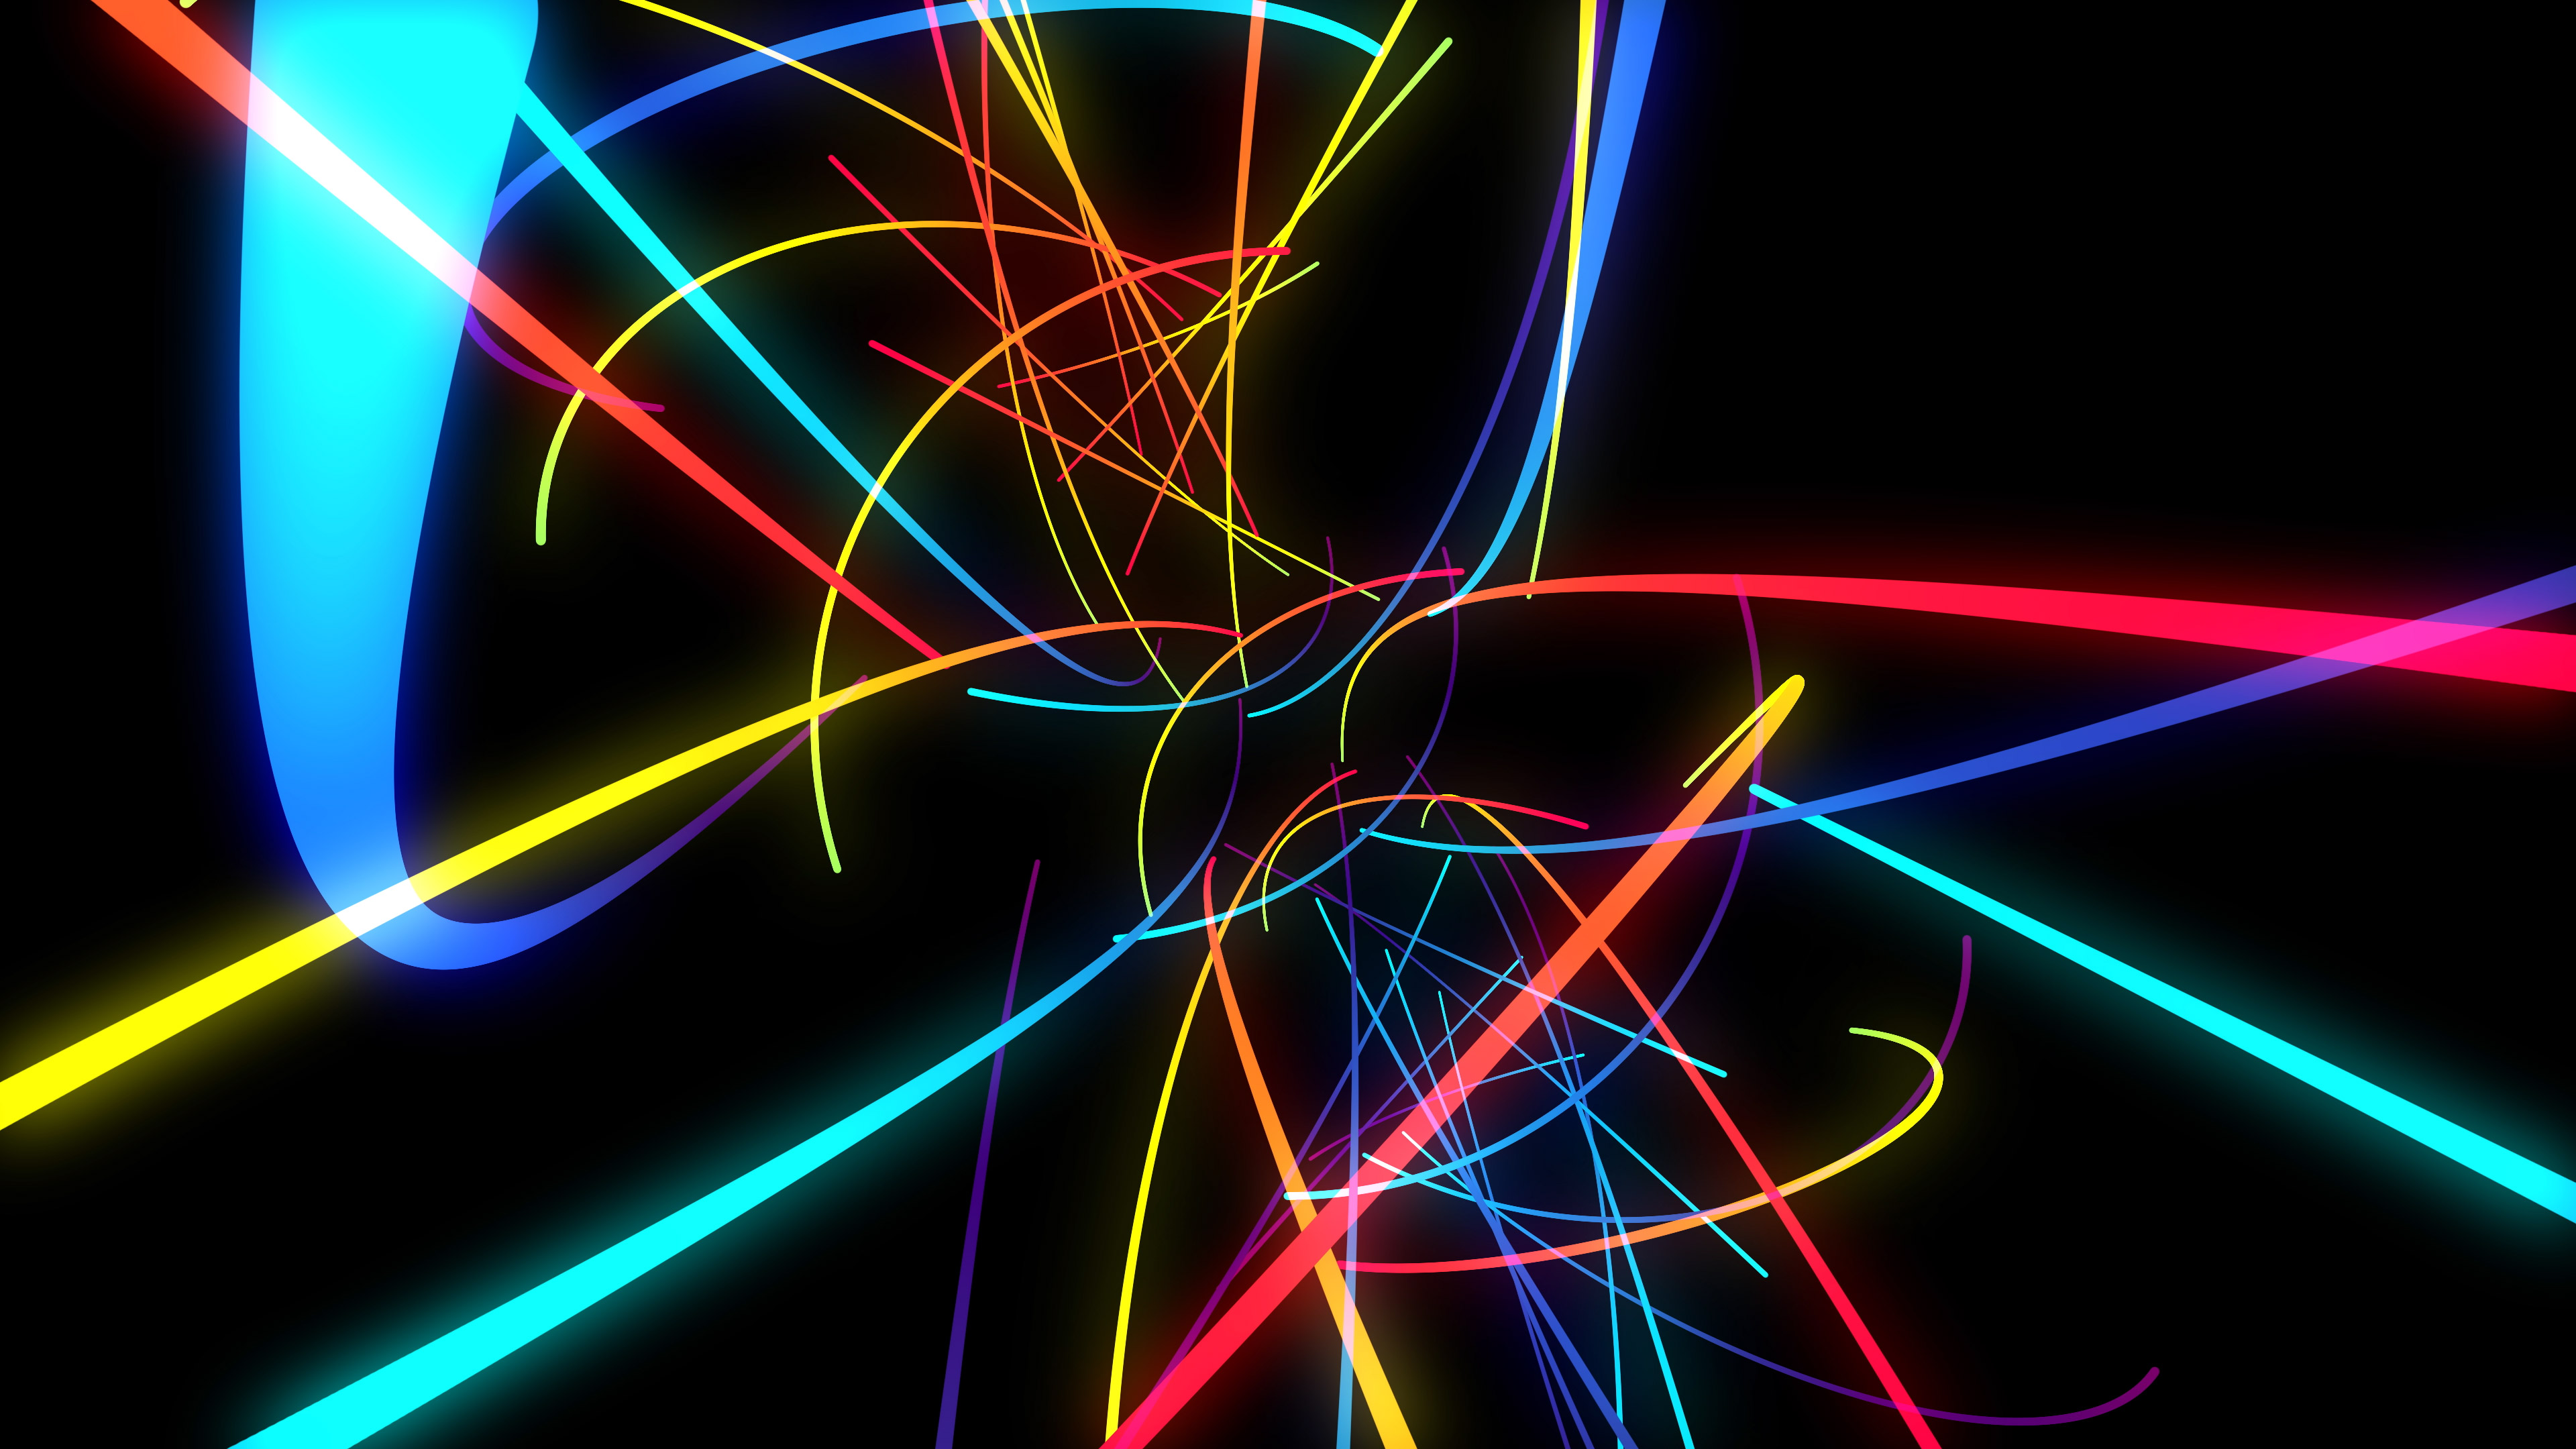 Neon Neon Lights Digital Art Colorful Shapes Simple Background Black Background Abstract Minimalism  3840x2160